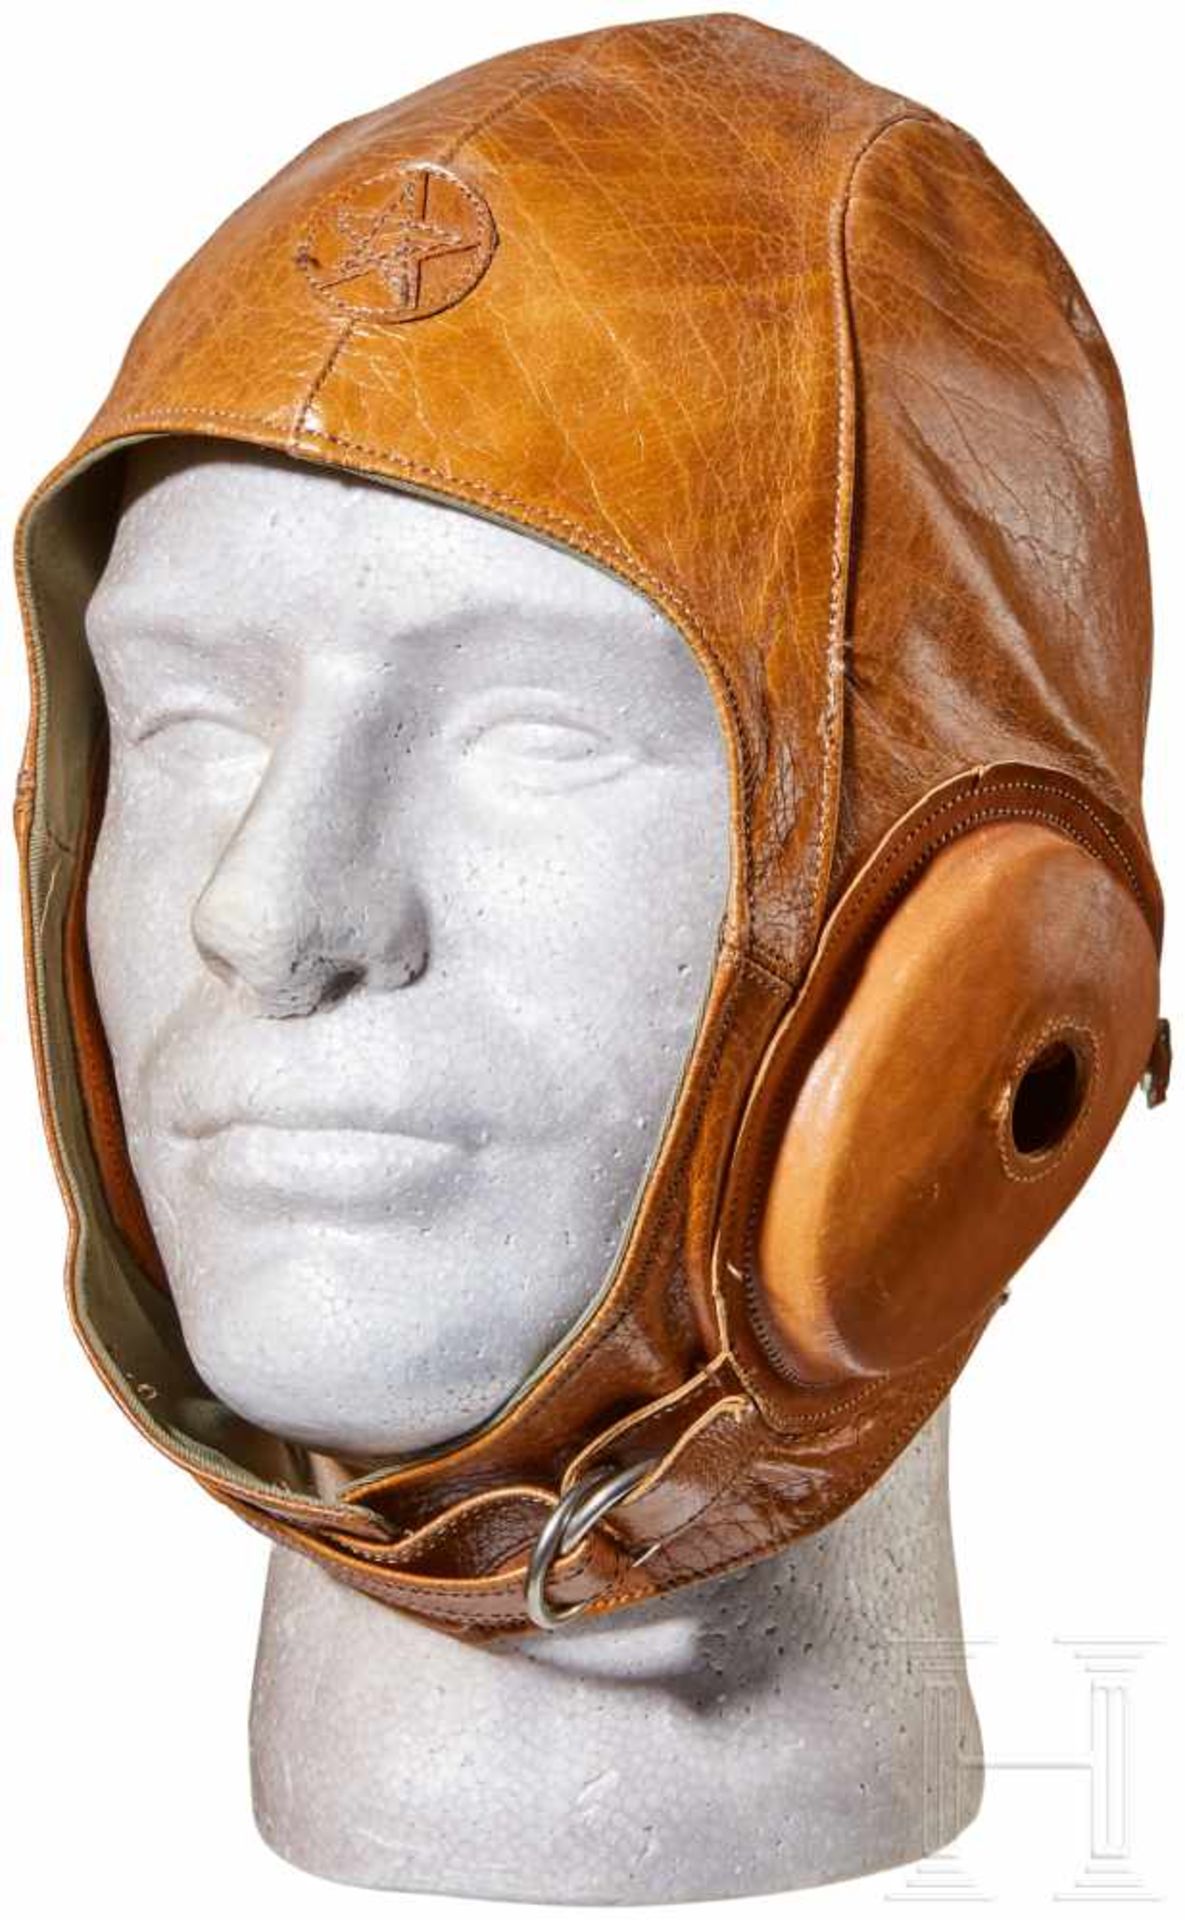 A Japanese Army Pilot Flight HelmetOrange-brown leather body, stitched star in circle at forehead,